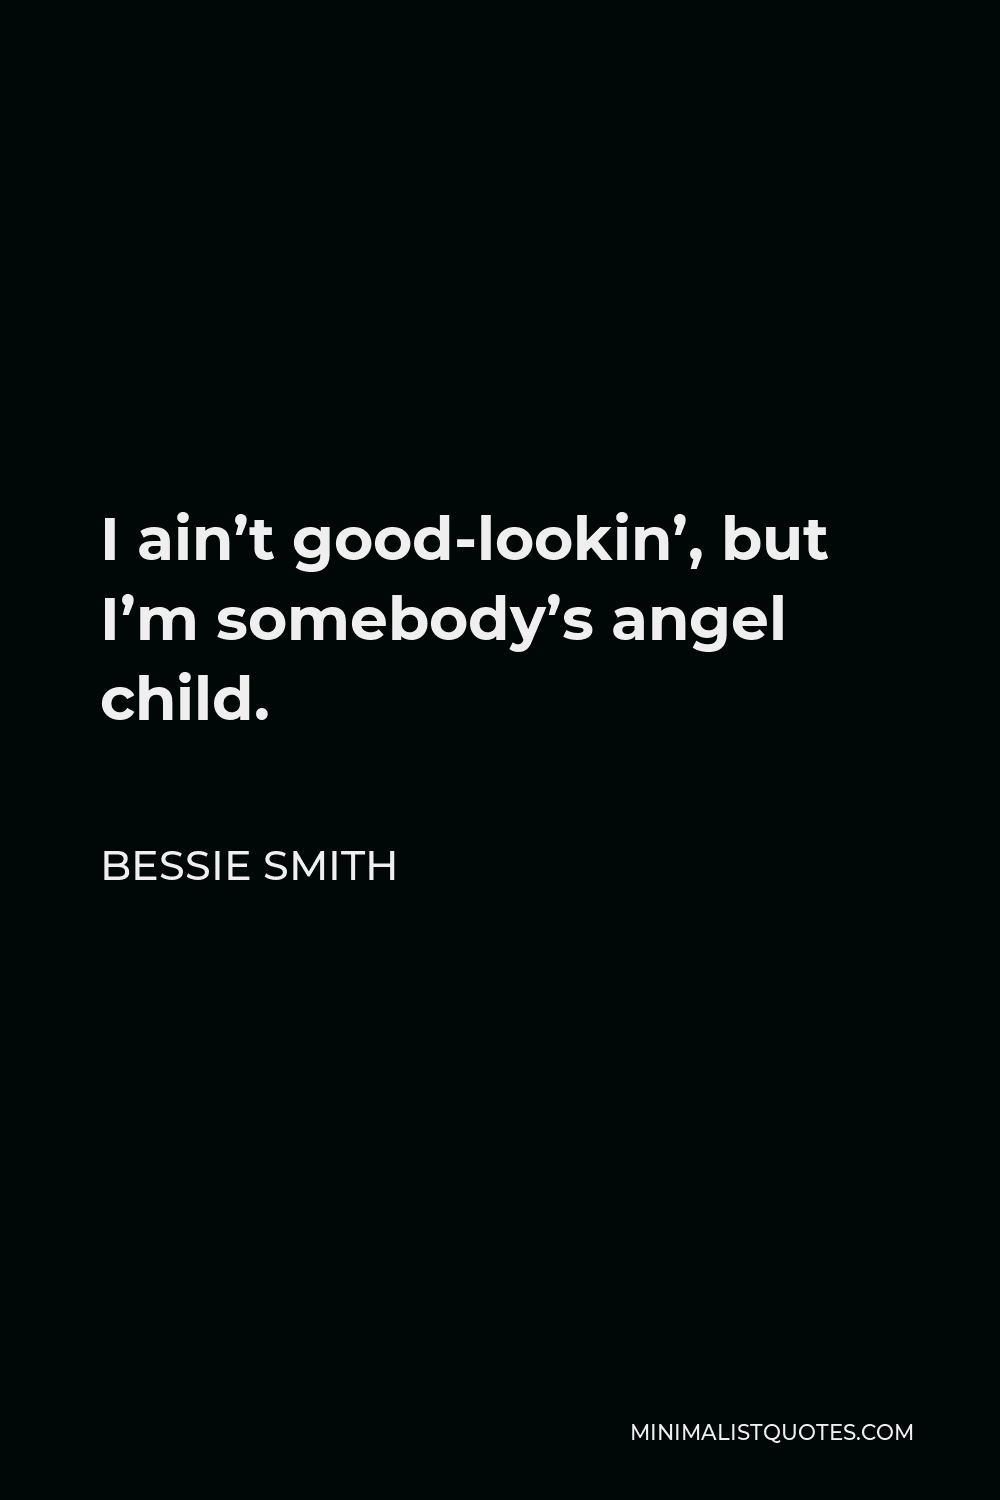 Bessie Smith Quote - I ain’t good-lookin’, but I’m somebody’s angel child.